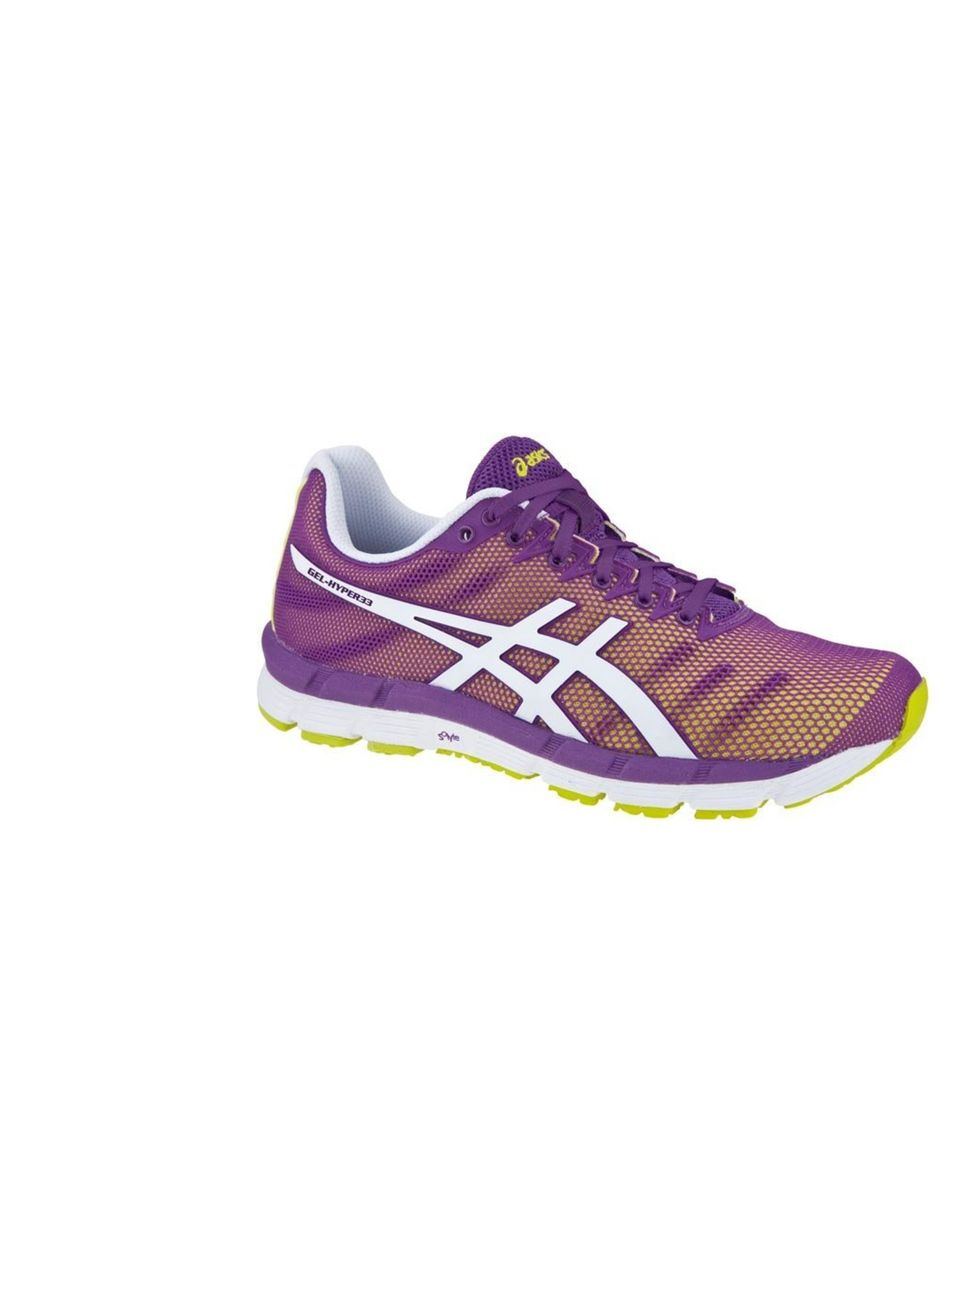 <p><strong><a href="http://www.asics.co.uk/running/products/gel-hyper33-women/">Asics</a> Gel Hyper33, £130 </strong></p><p><strong>Weight:</strong> around 235g for the pair, but they feel heavier than others tested.</p><p><strong>Pros: </strong>Asics are